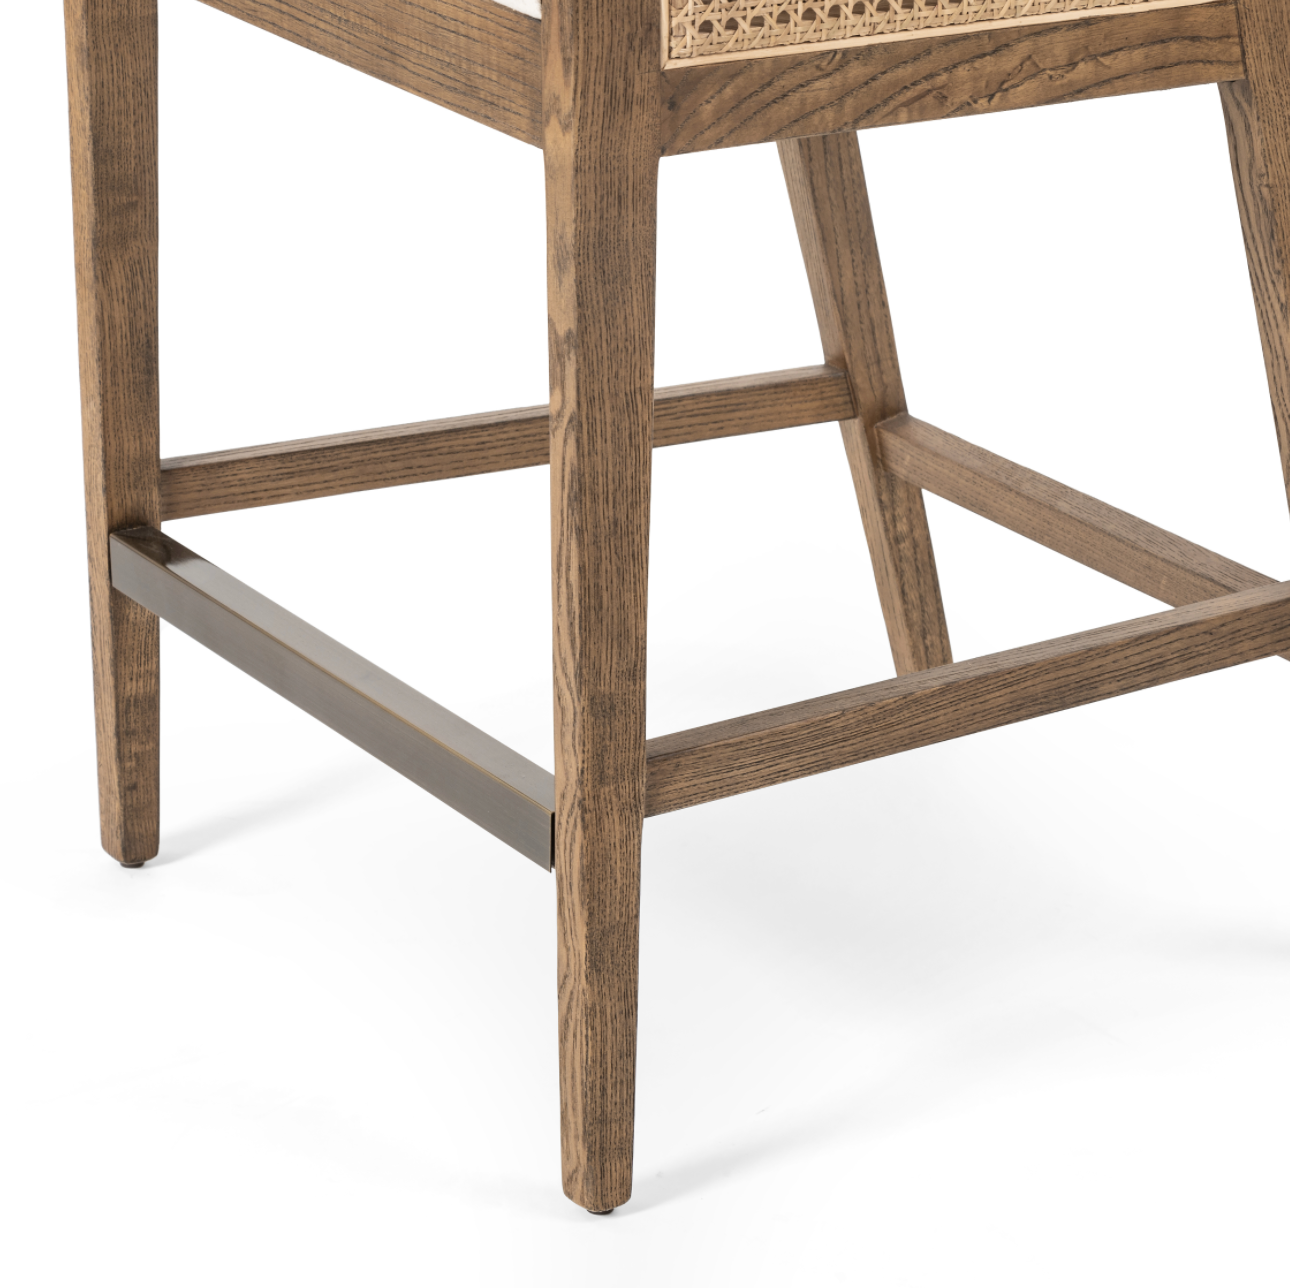 We love the retro look the cane brings to this Antonia Bar + Counter Stool - Toasted Nettlewood. A stunning piece to complete a retro or boho aesthetic in any kitchen or bar area.   Counter Stool Overall Dimensions:  22.00"w x 22.50"d x 39.00"h Seat Depth: 18.5" Seat Height: 26" Arm Height from Floor: 33.25" Arm Height from Seat: 7.25"  Colors: Natural Cane, Toasted Nettlewood, Brass Kickplate, Savile Flax Materials: Cane, Solid Nettlewood, Iron, 92% Pl, 8% Li